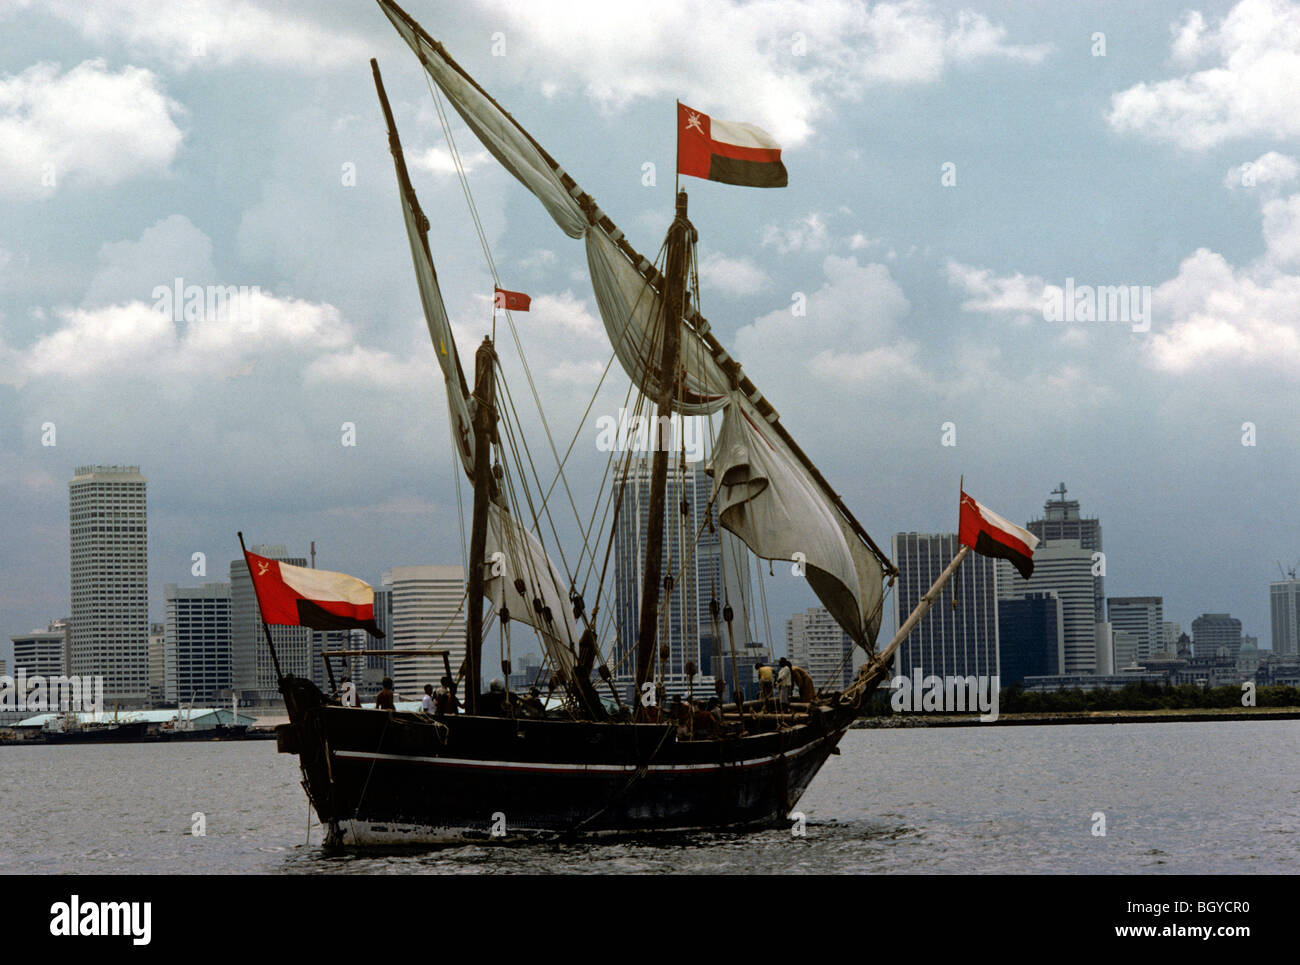 The dhow Sohar in Singapore 1981. Replica of 9th century Arab dhow. It was sailed from Oman to Singapore and back. Stock Photo